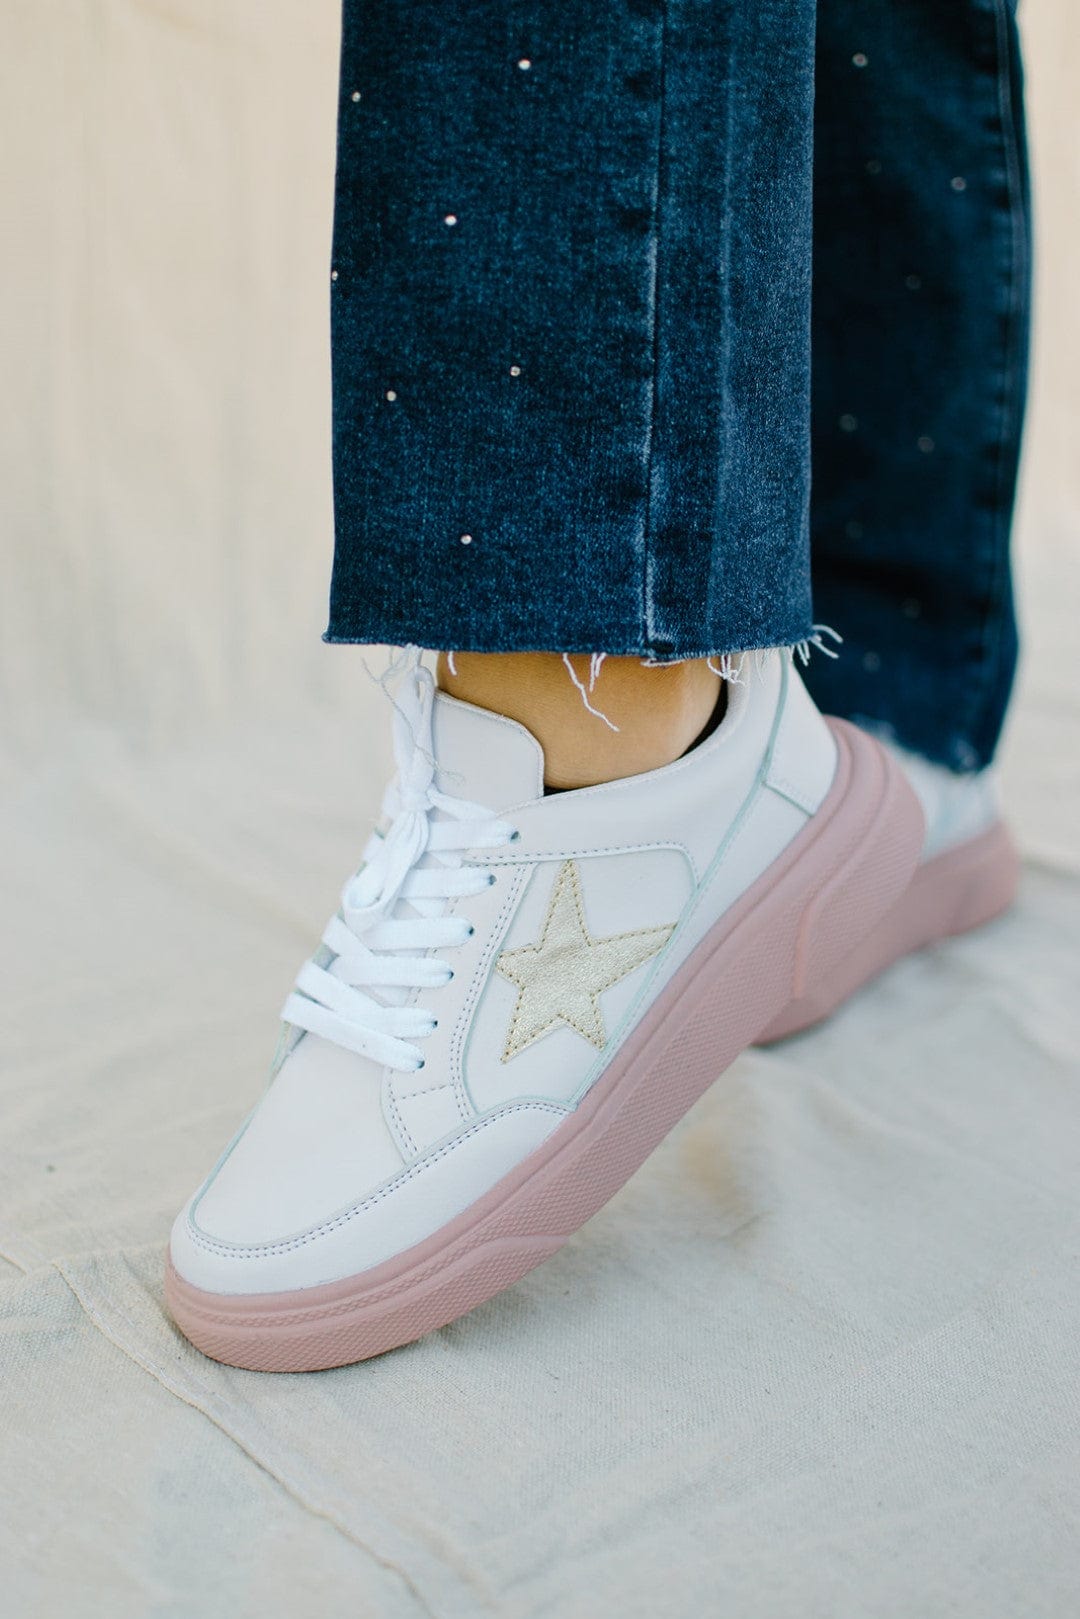 White Sneakers With Pink Sole